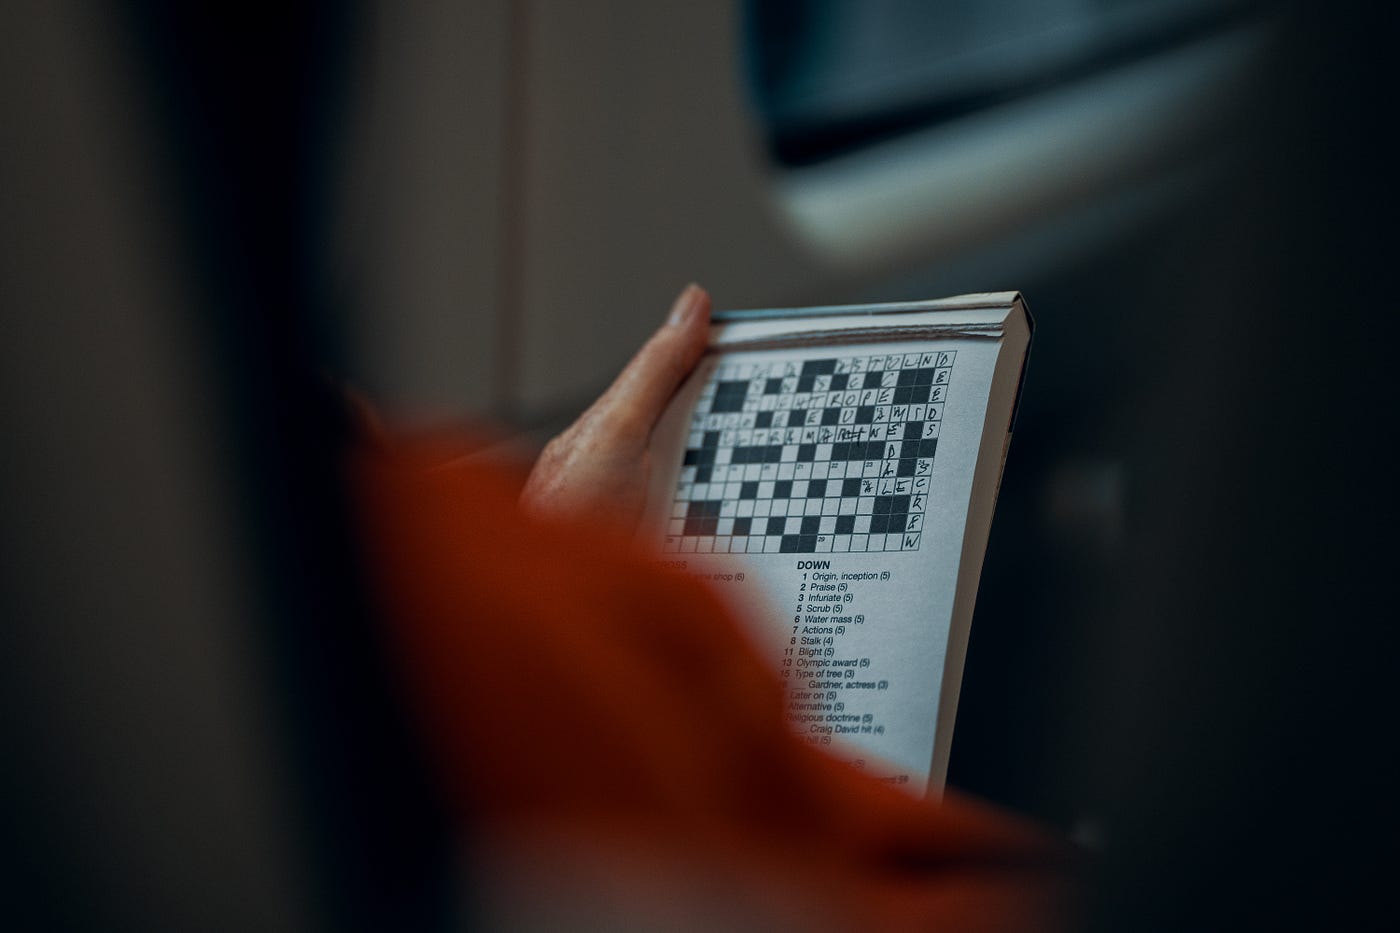 Cryptic crossword hacks — the lift and separate